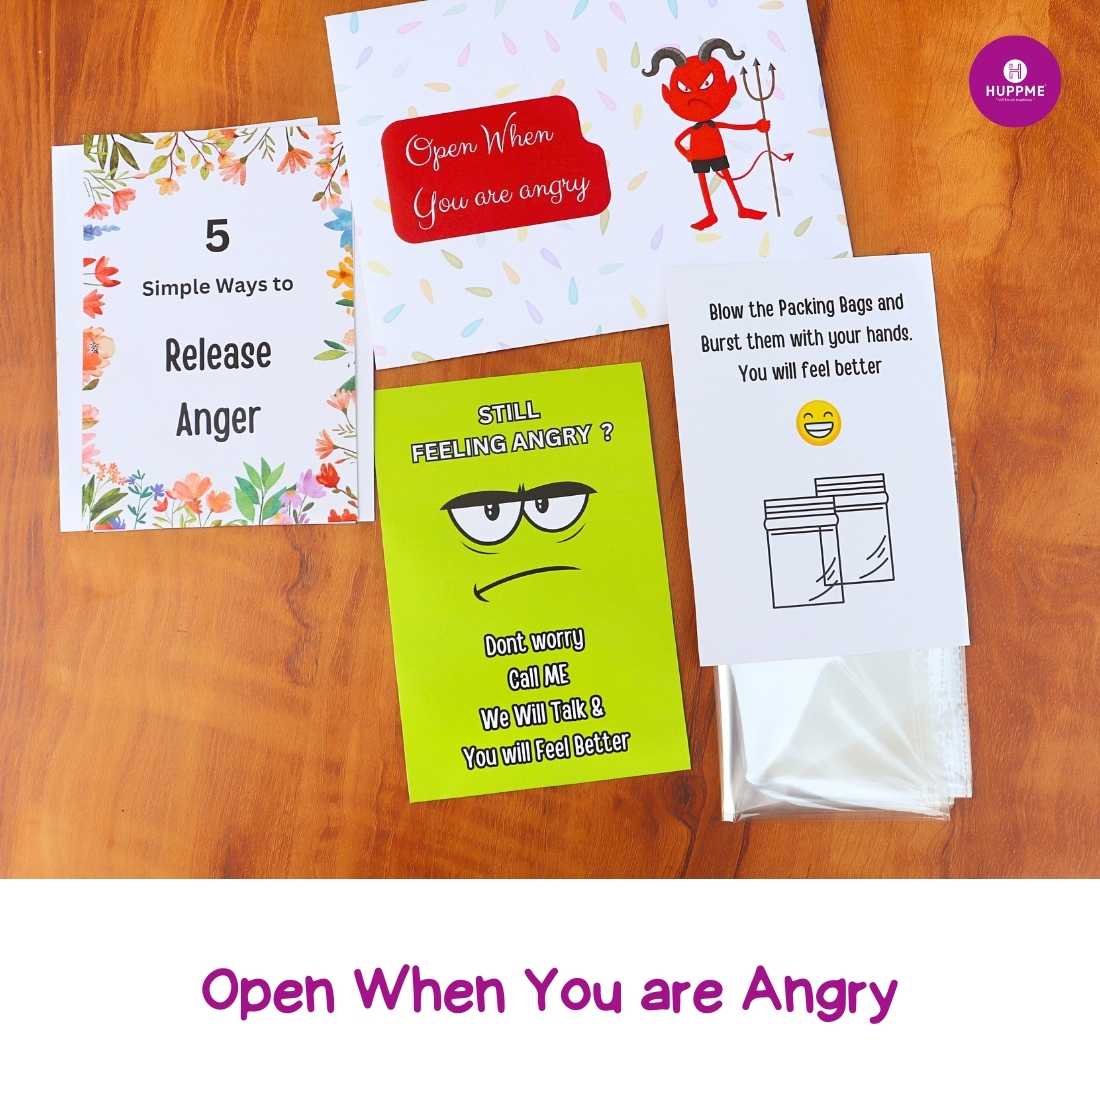 Open When You are Angry